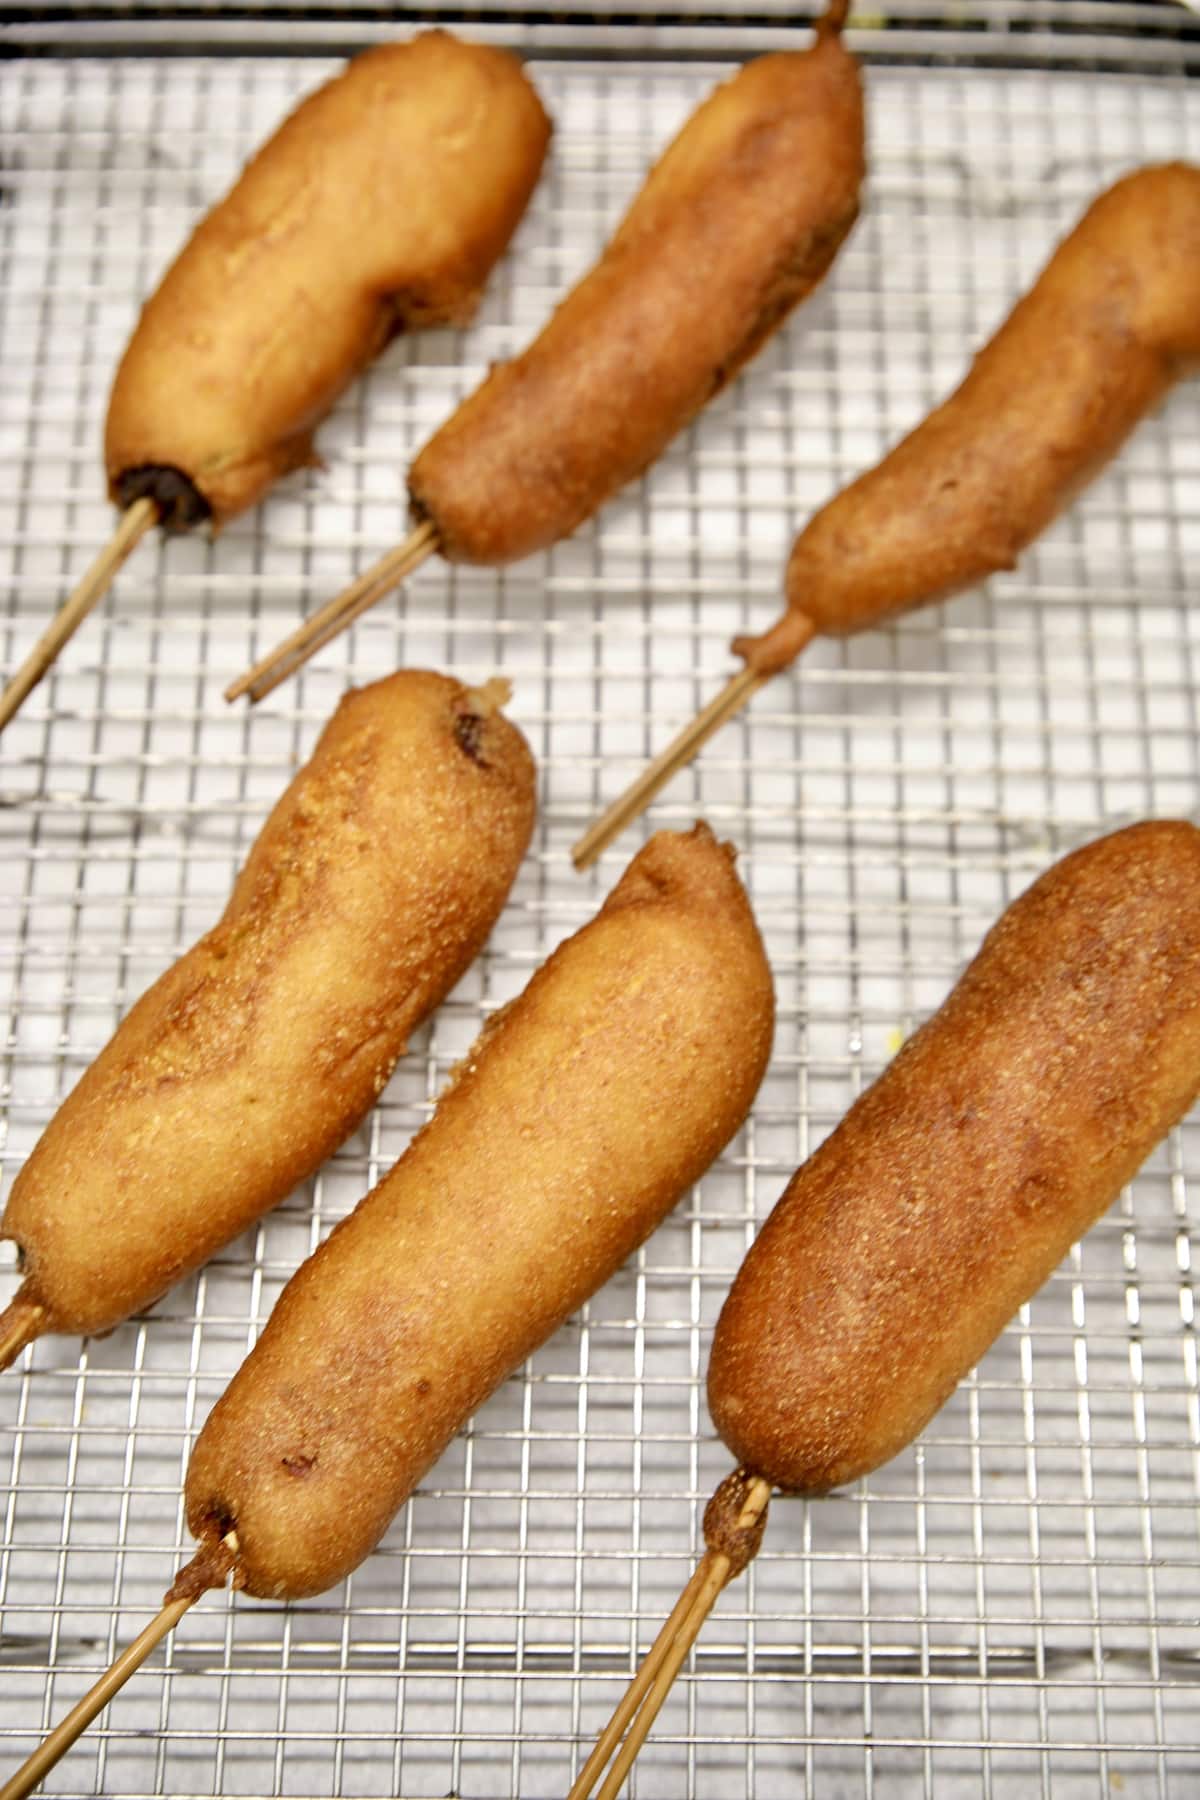 6 Corn dogs on a wire rack. 